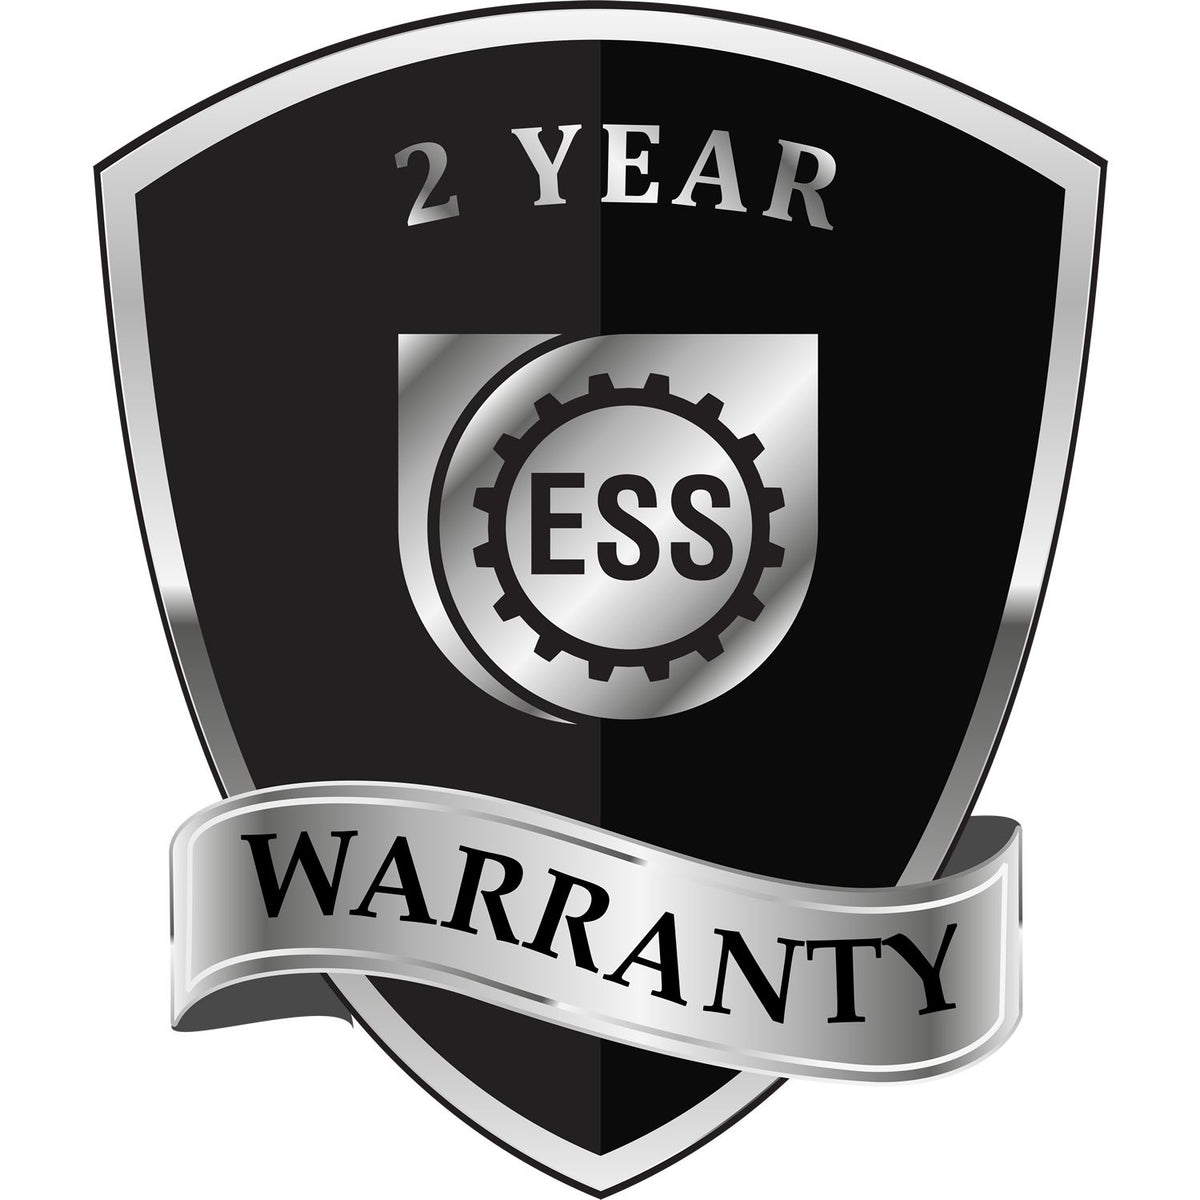 A badge or emblem showing a warranty icon for the State of New Jersey Architectural Seal Embosser